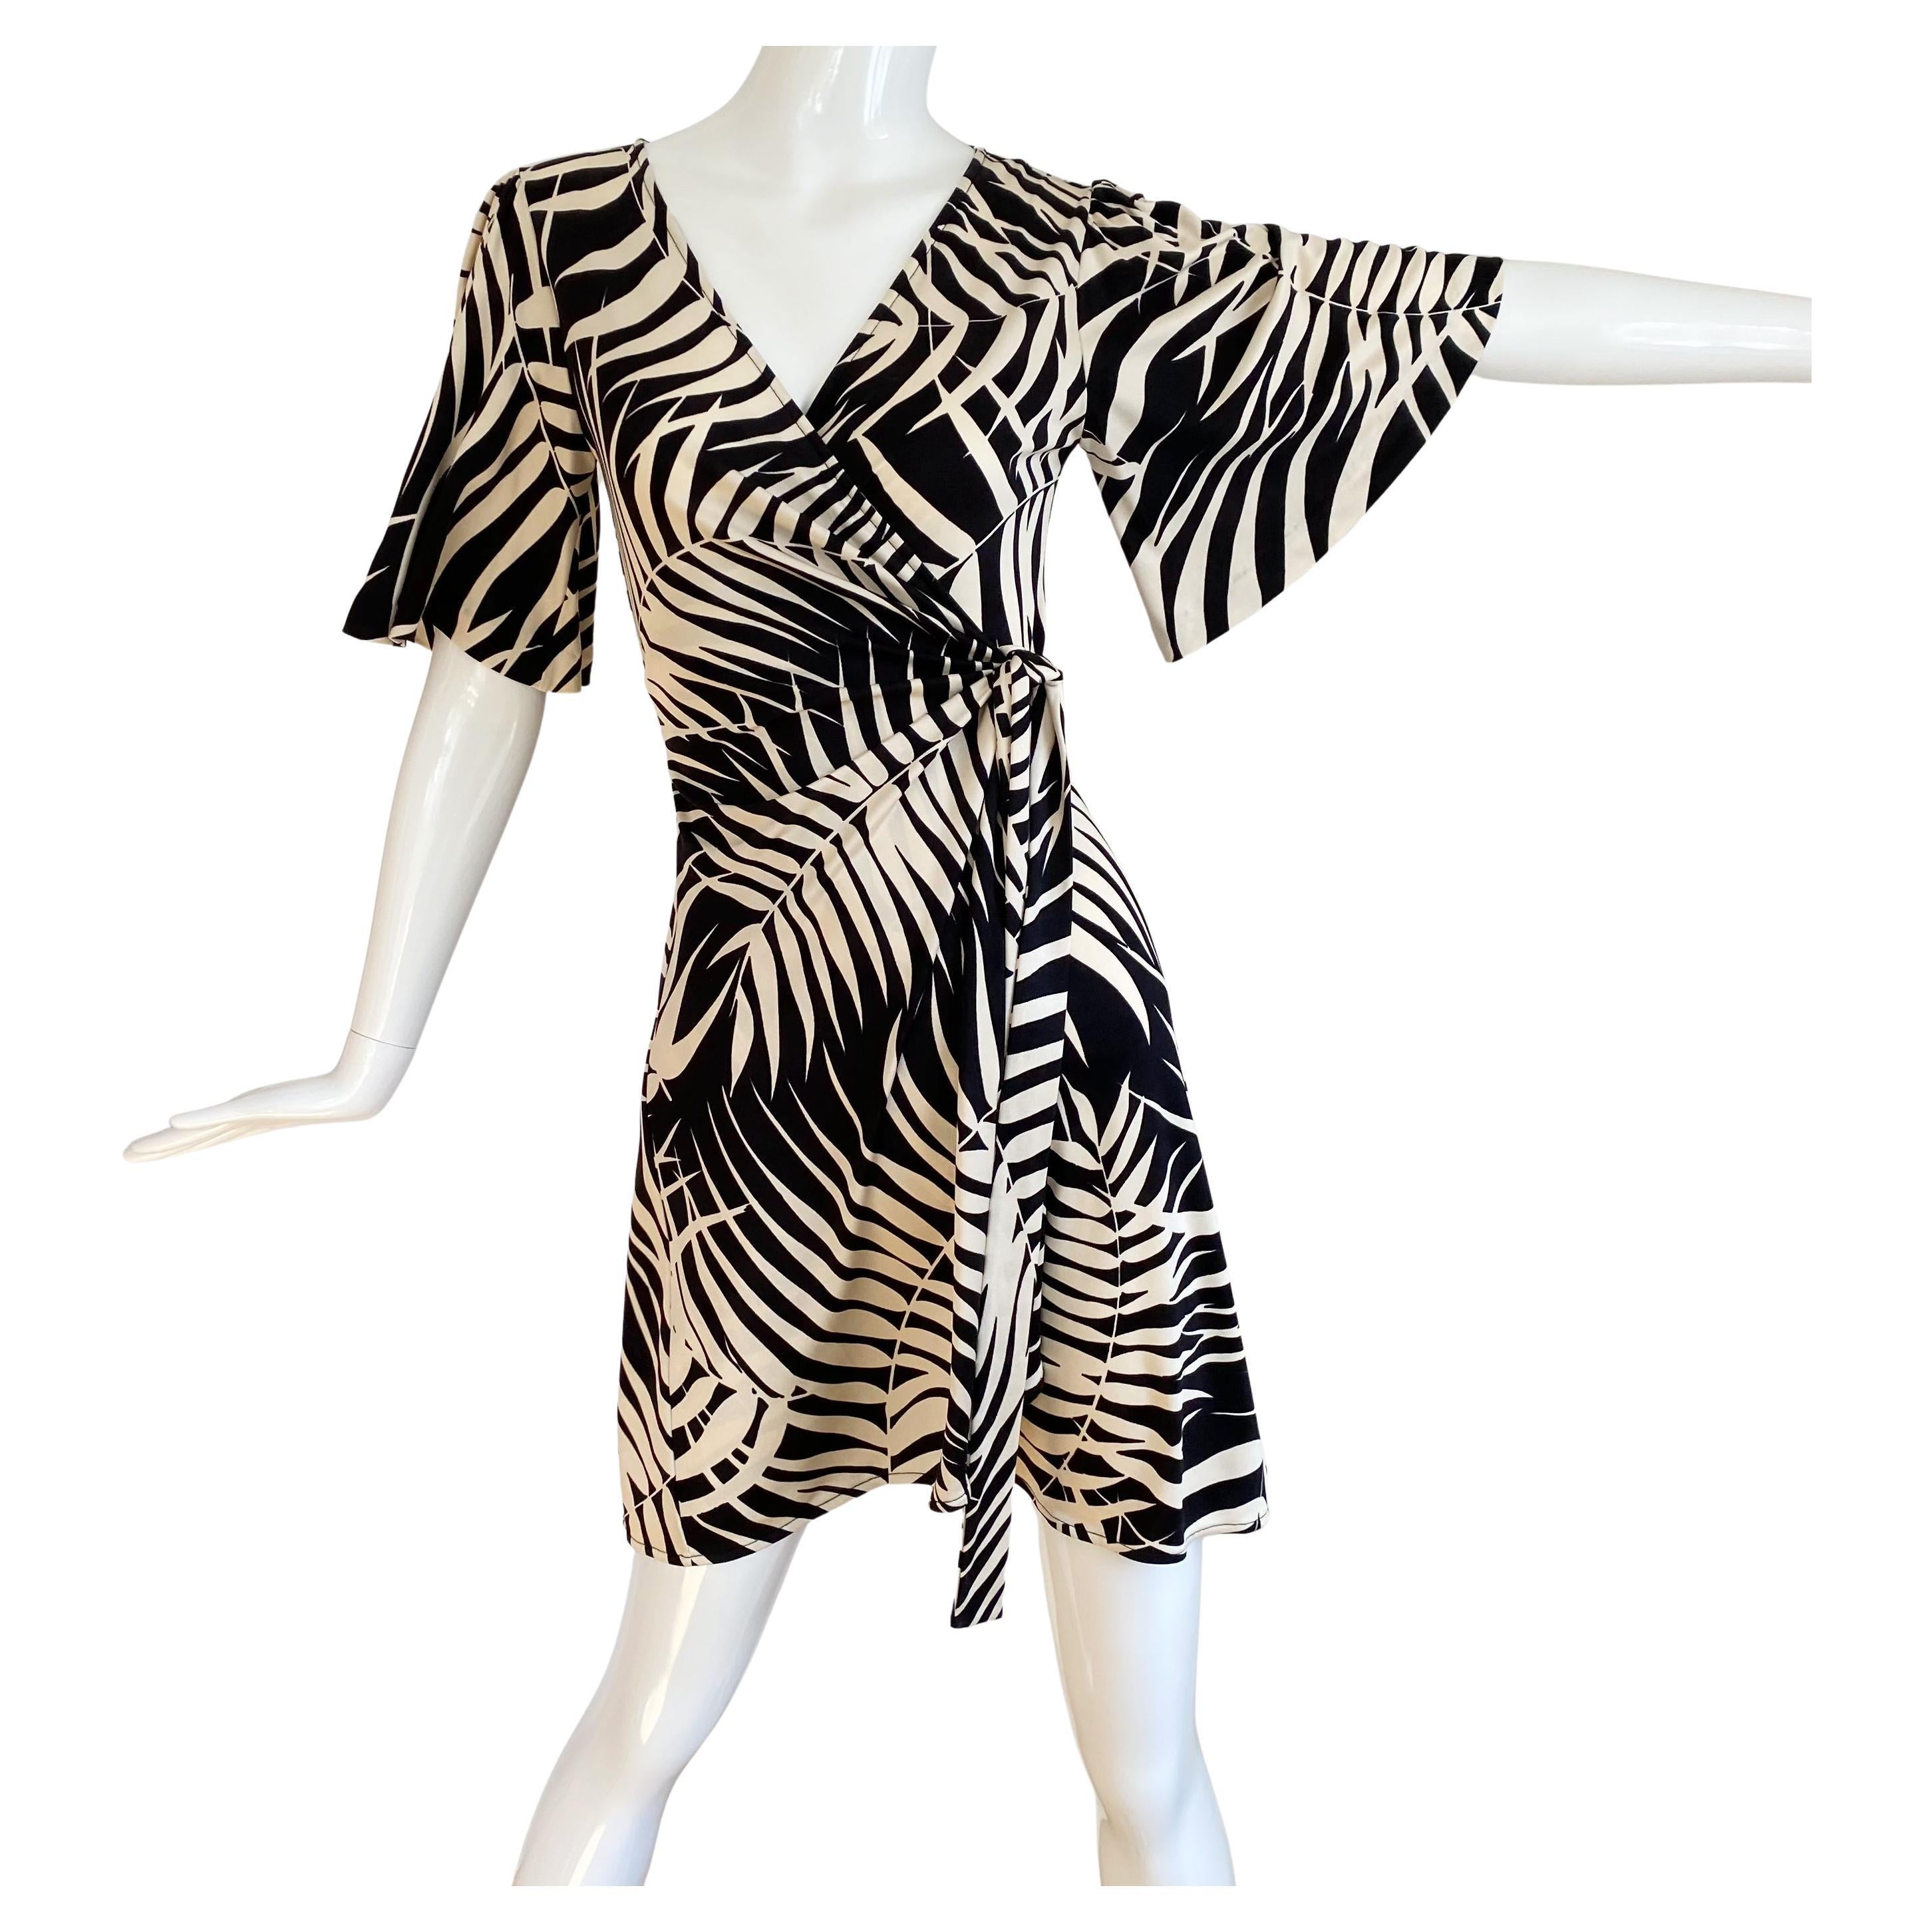 Versatile little true wrap dress with flattering flare sleeve.
Beautiful volume with every movement.  
In Flora's hand-signed, original ecru/black fern print.
Approximately 37